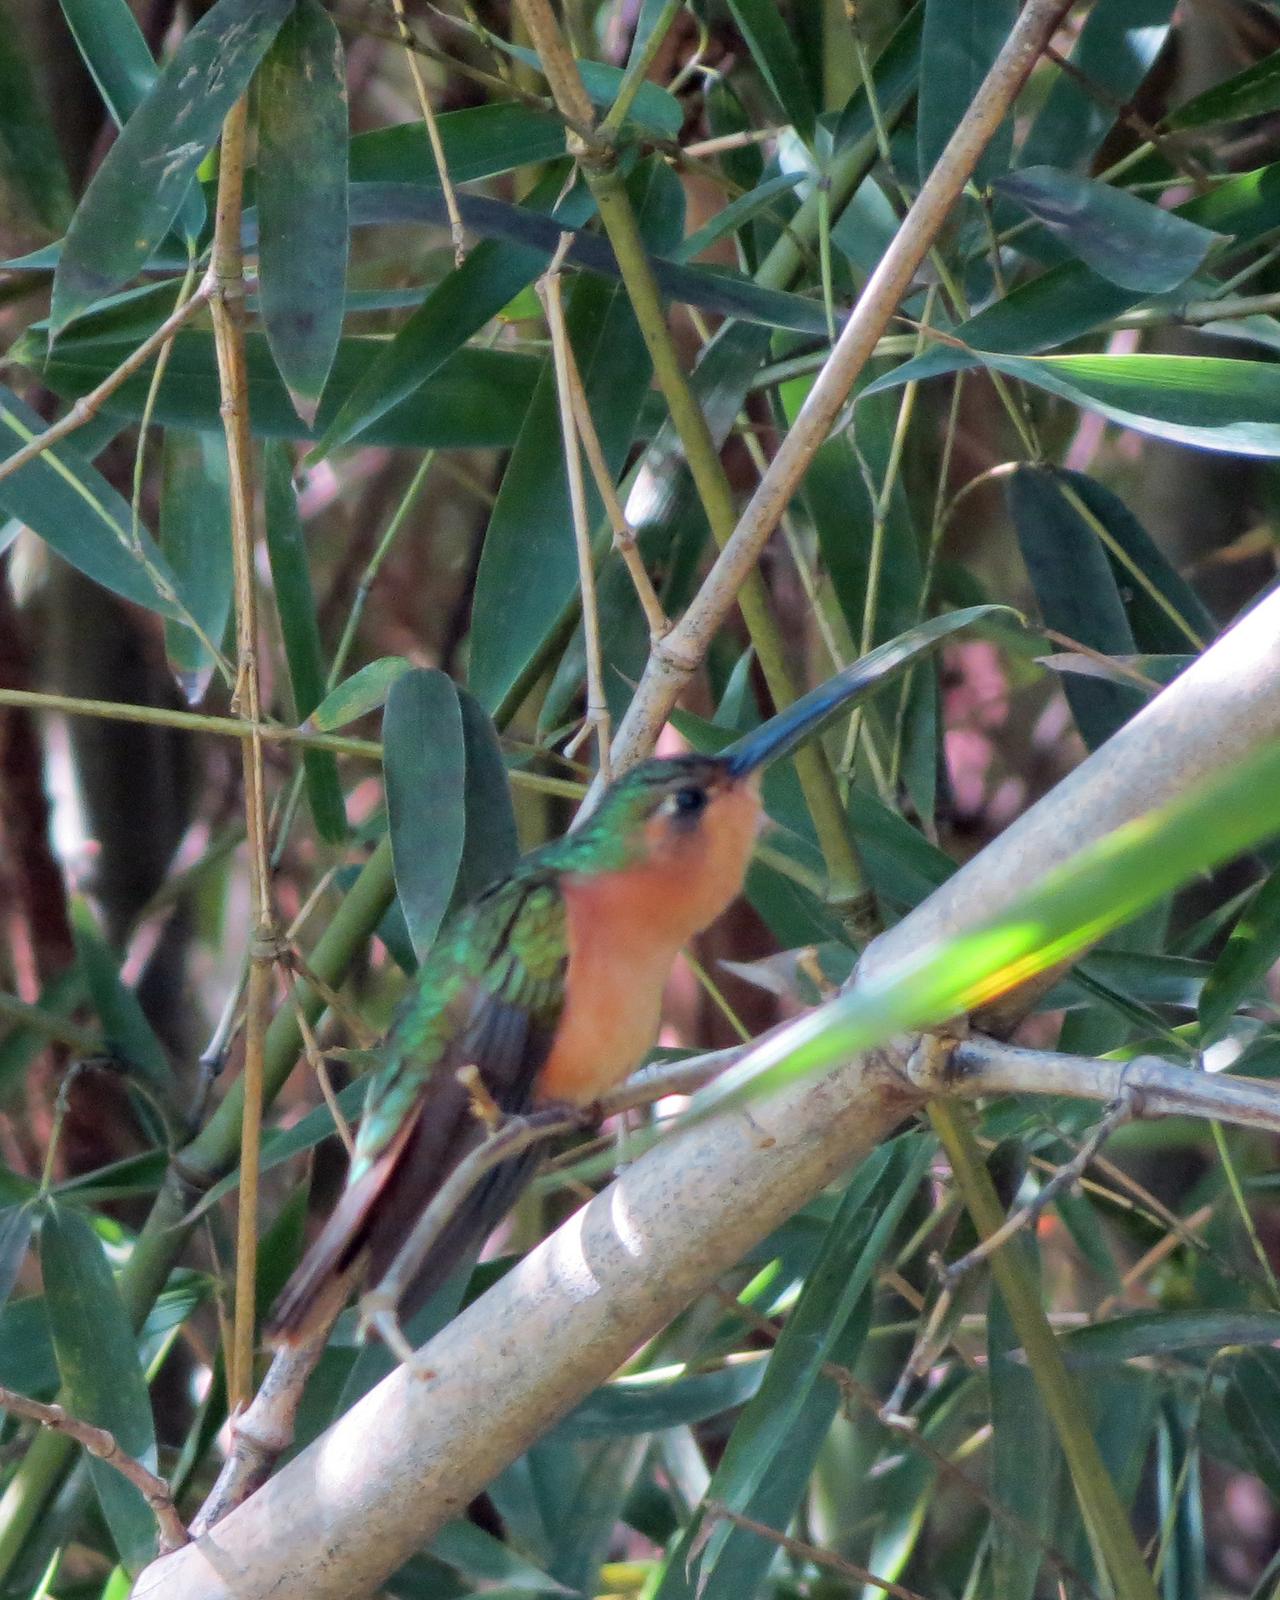 Rufous Sabrewing Photo by Anna E. Wittmer